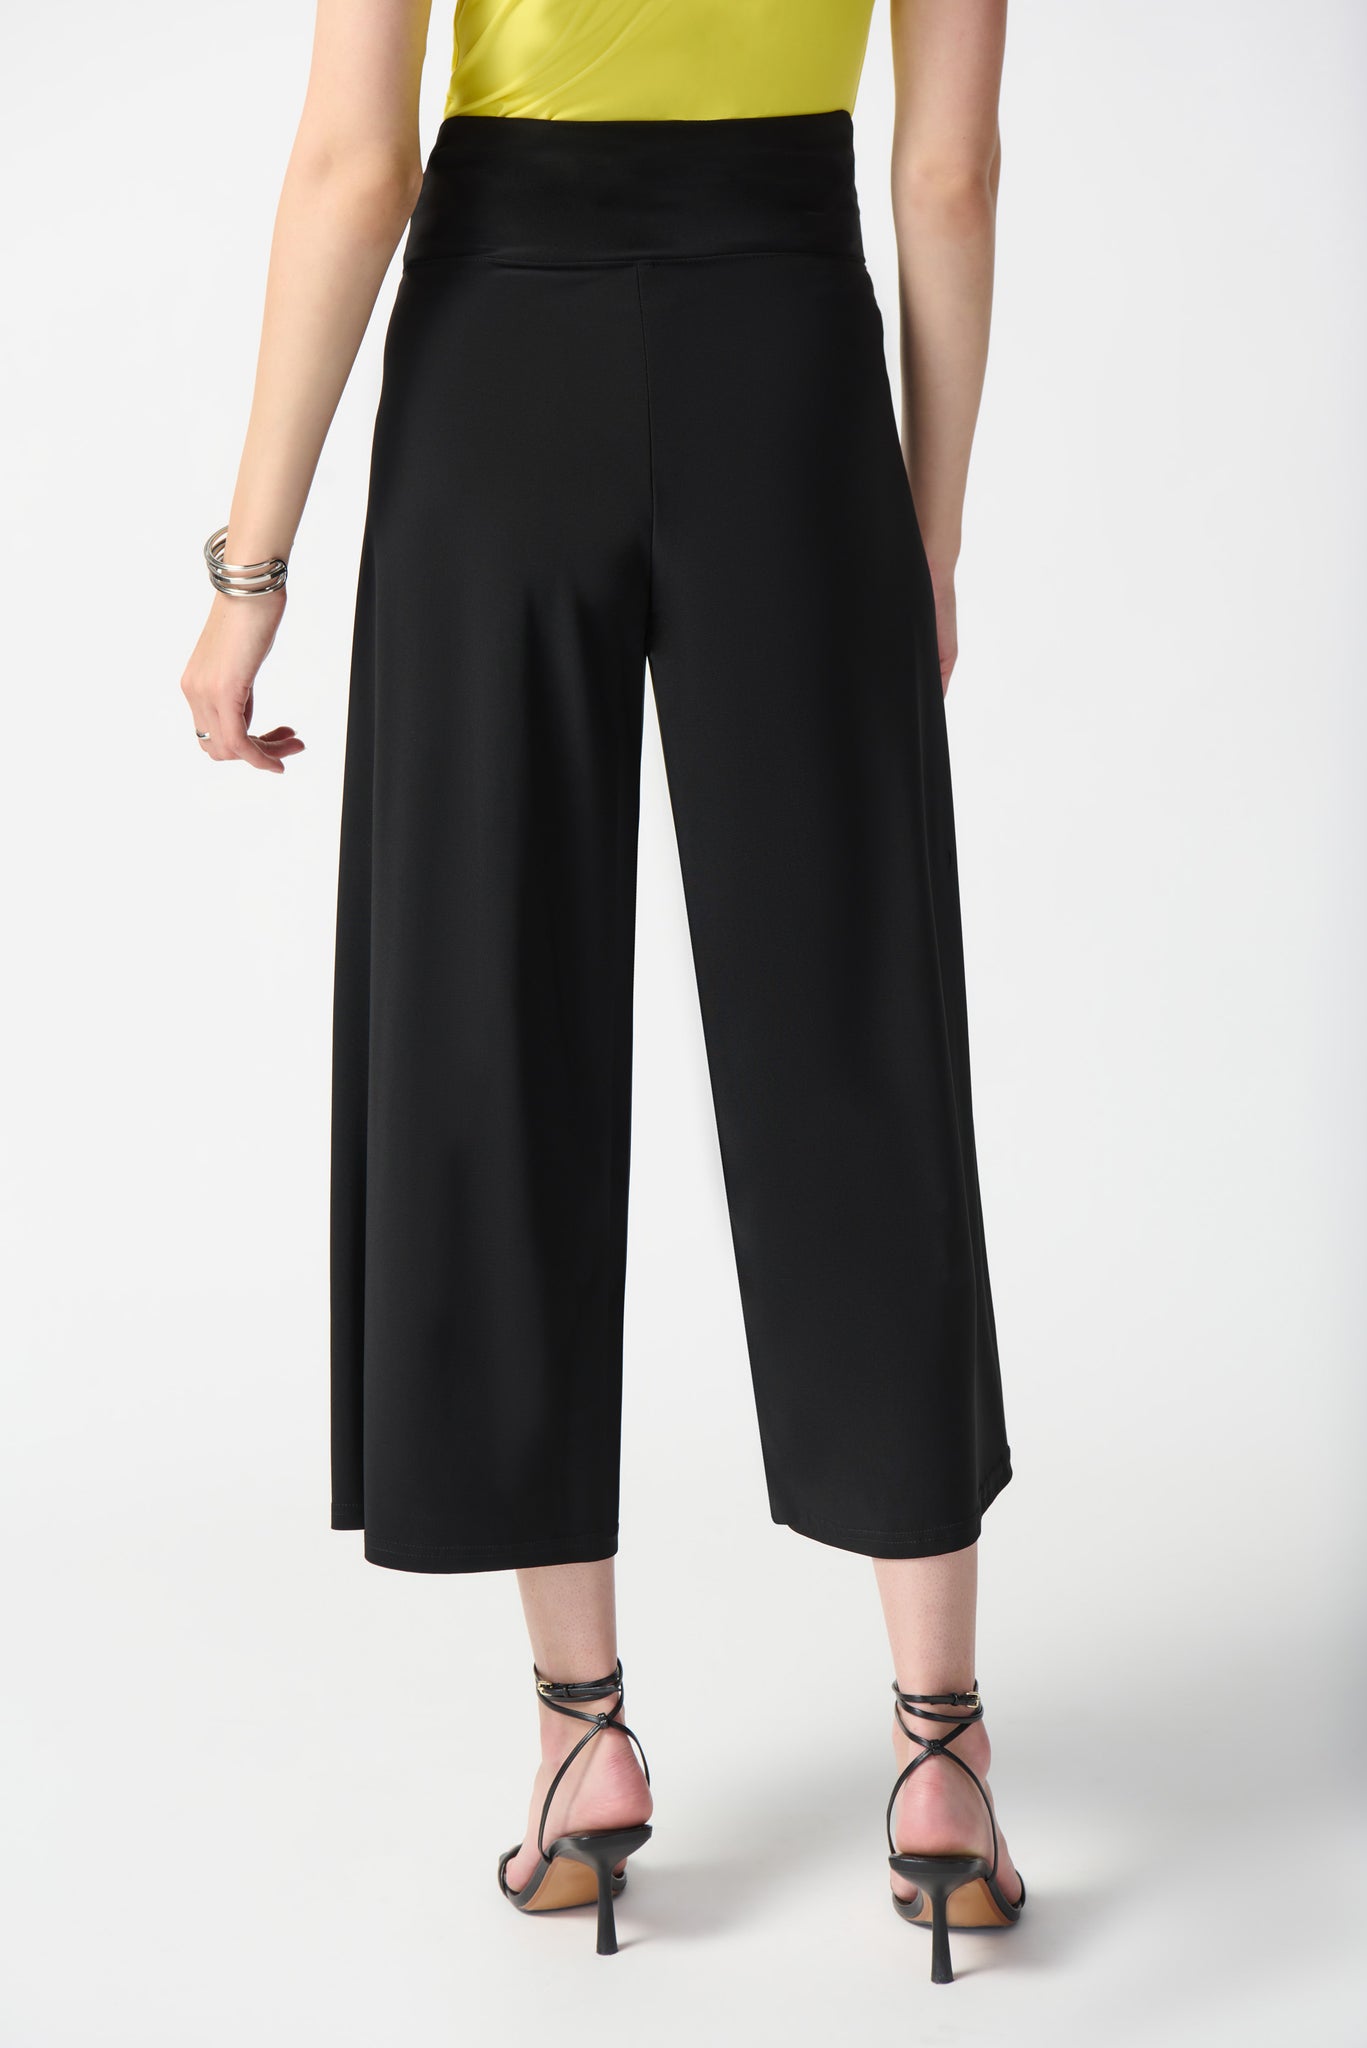 Silky Knit Pull On Pants | Black